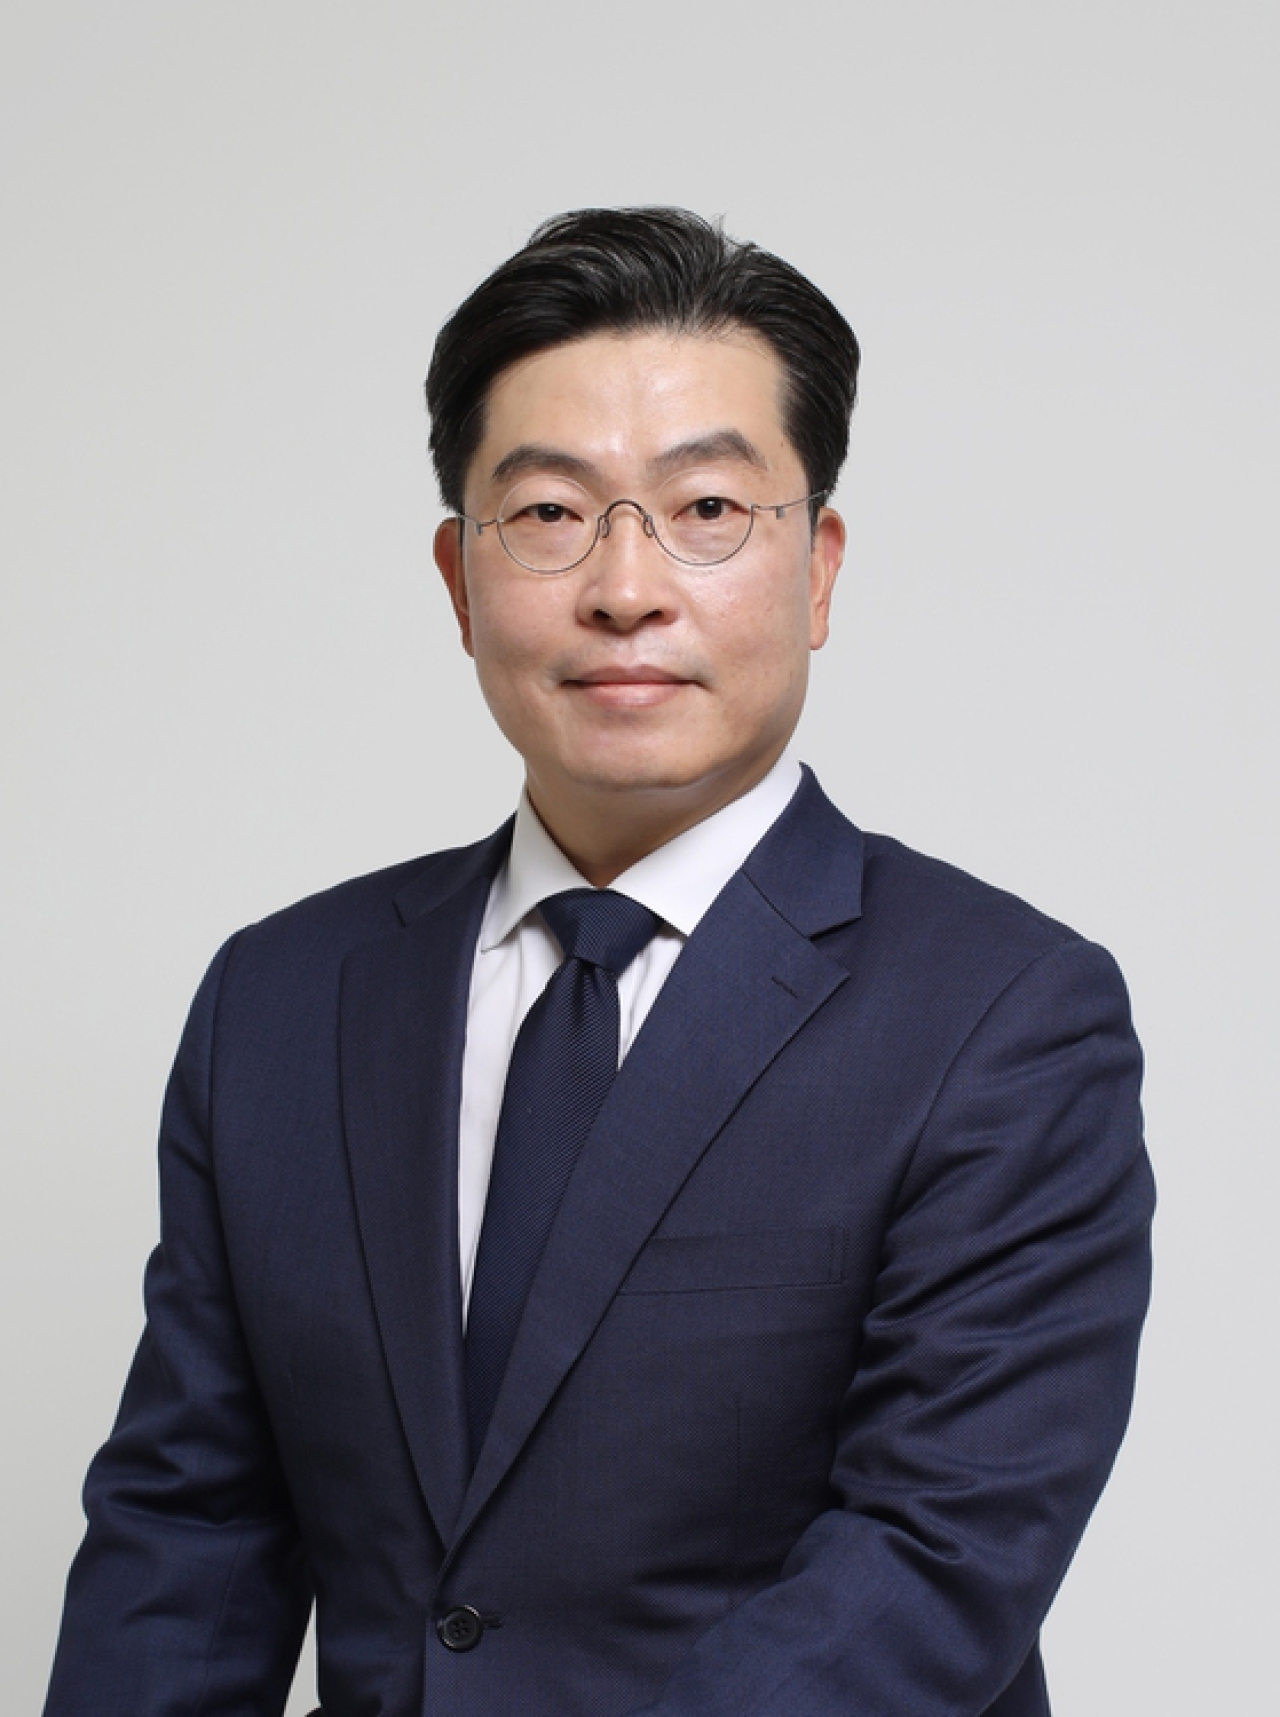 Woo Jung-yeop, former director-general for strategy at South Korea's Ministry of Foreign Affairs, has been appointed as the senior vice president under Hyundai Motor Group's Global Policy Office. (Hyundai Motor Group)